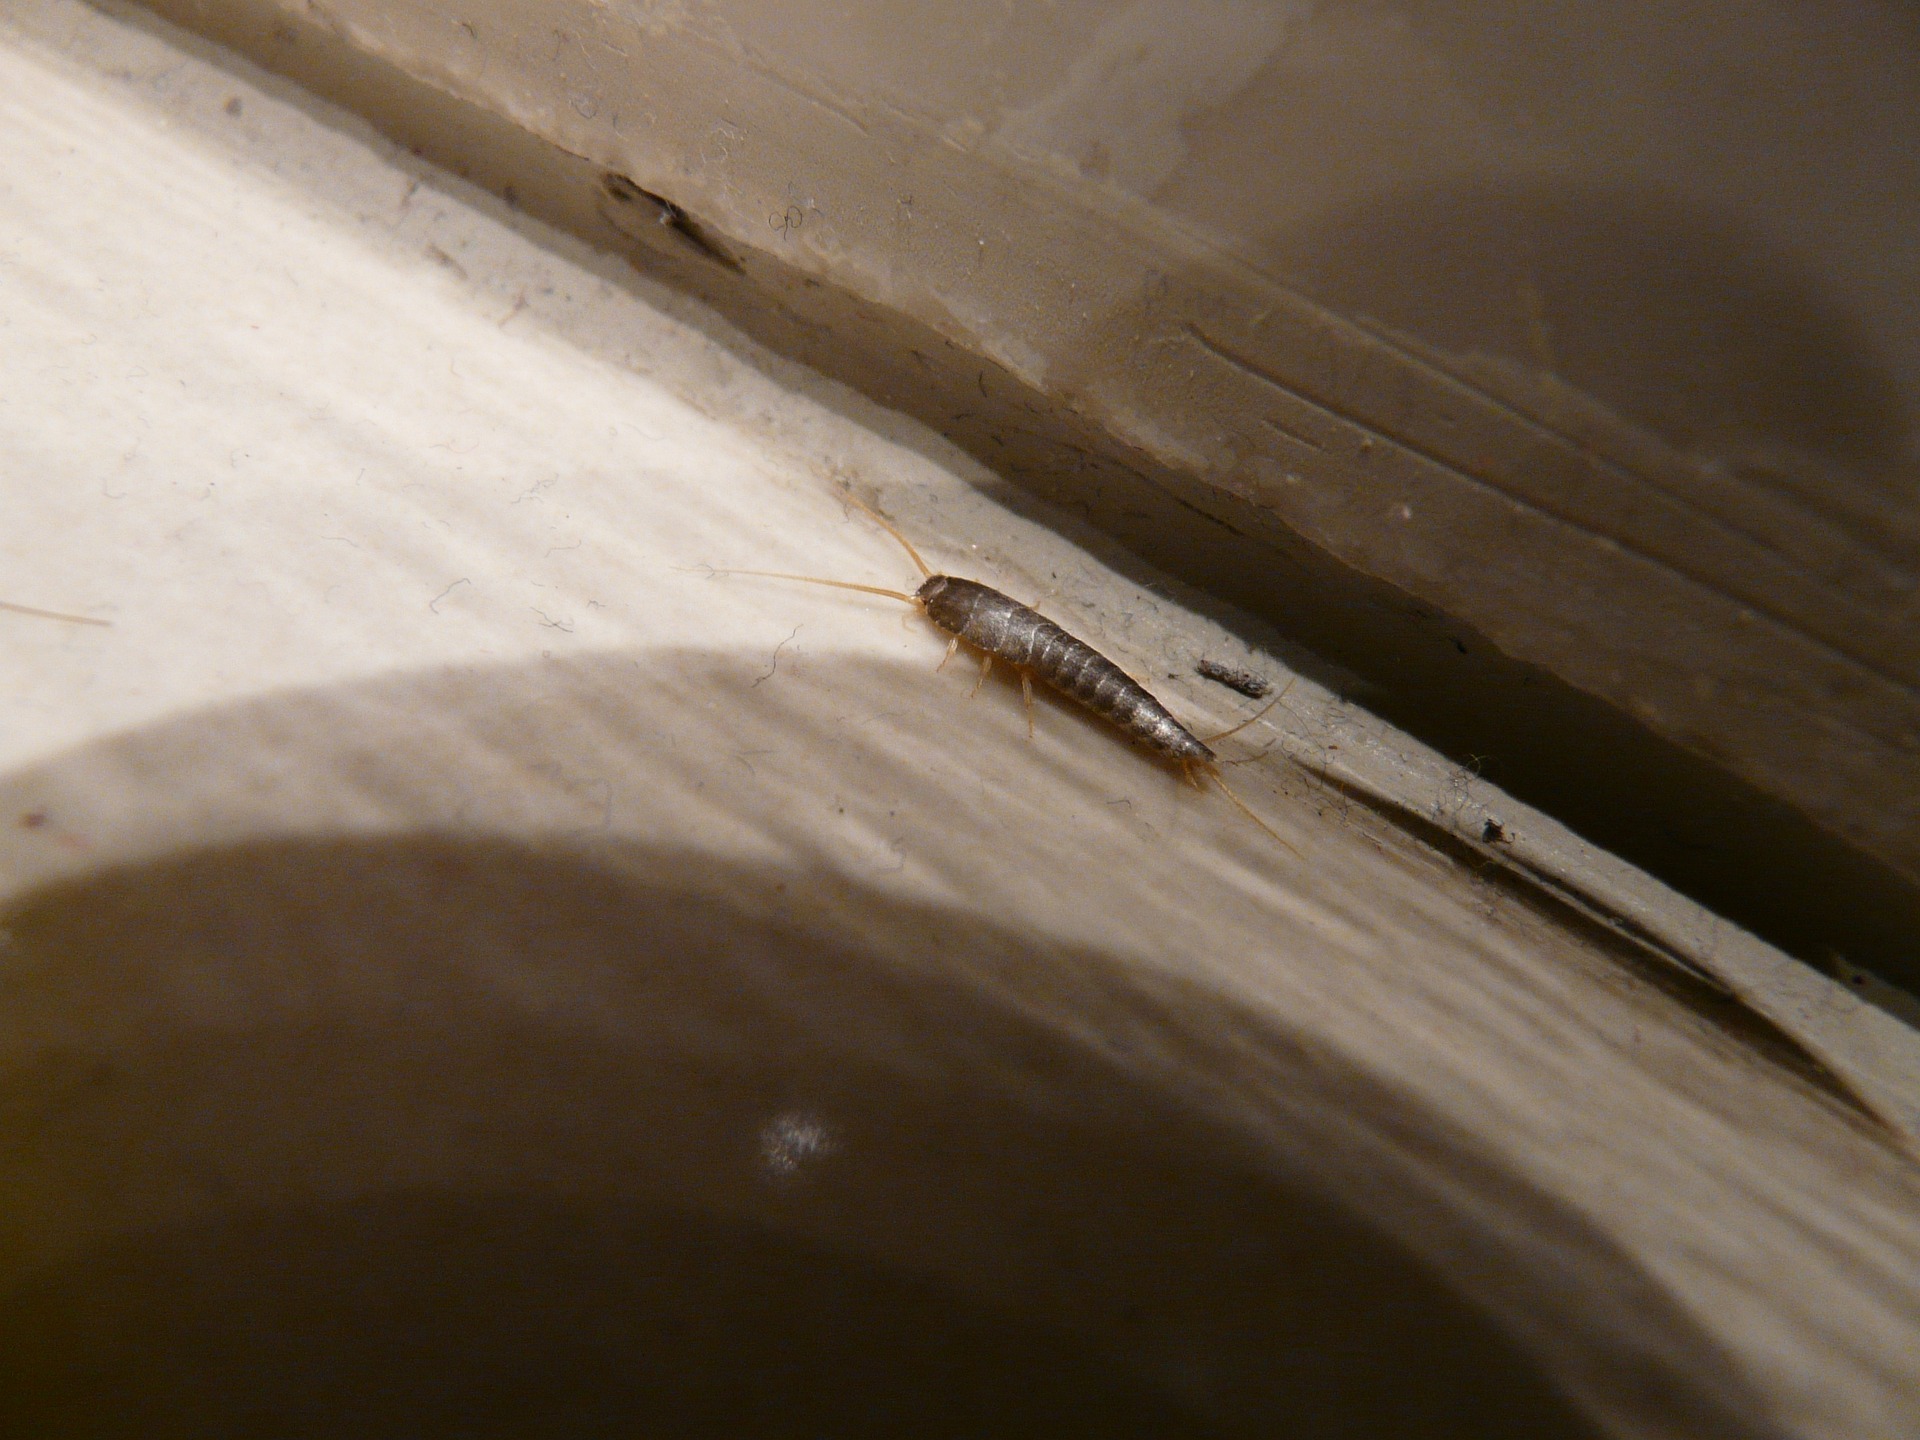 Why Are Silverfish in My House